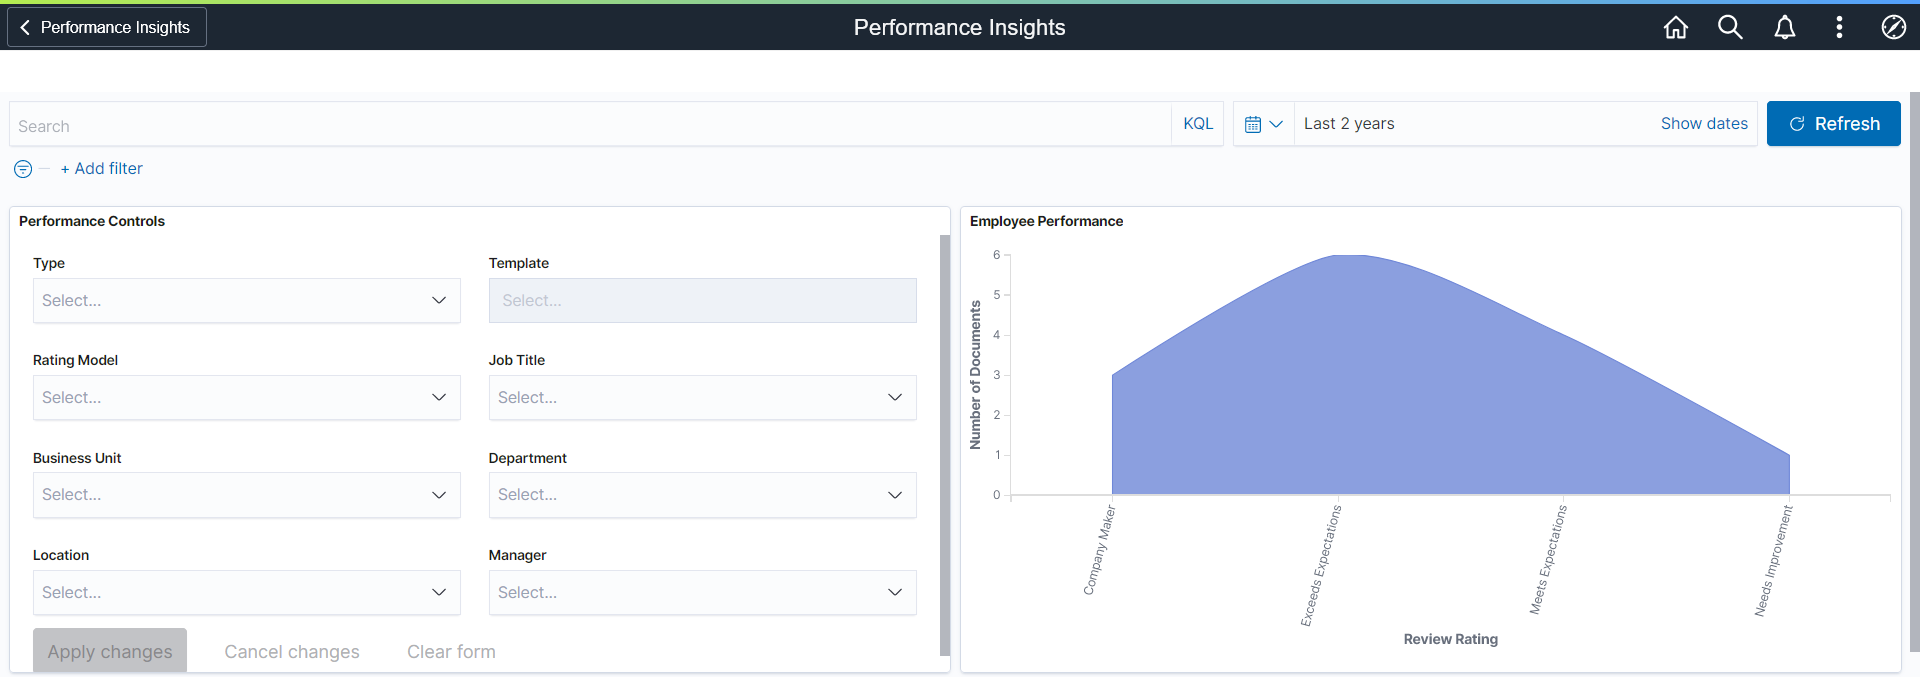 Performance Insights dashboard (1 of 2)